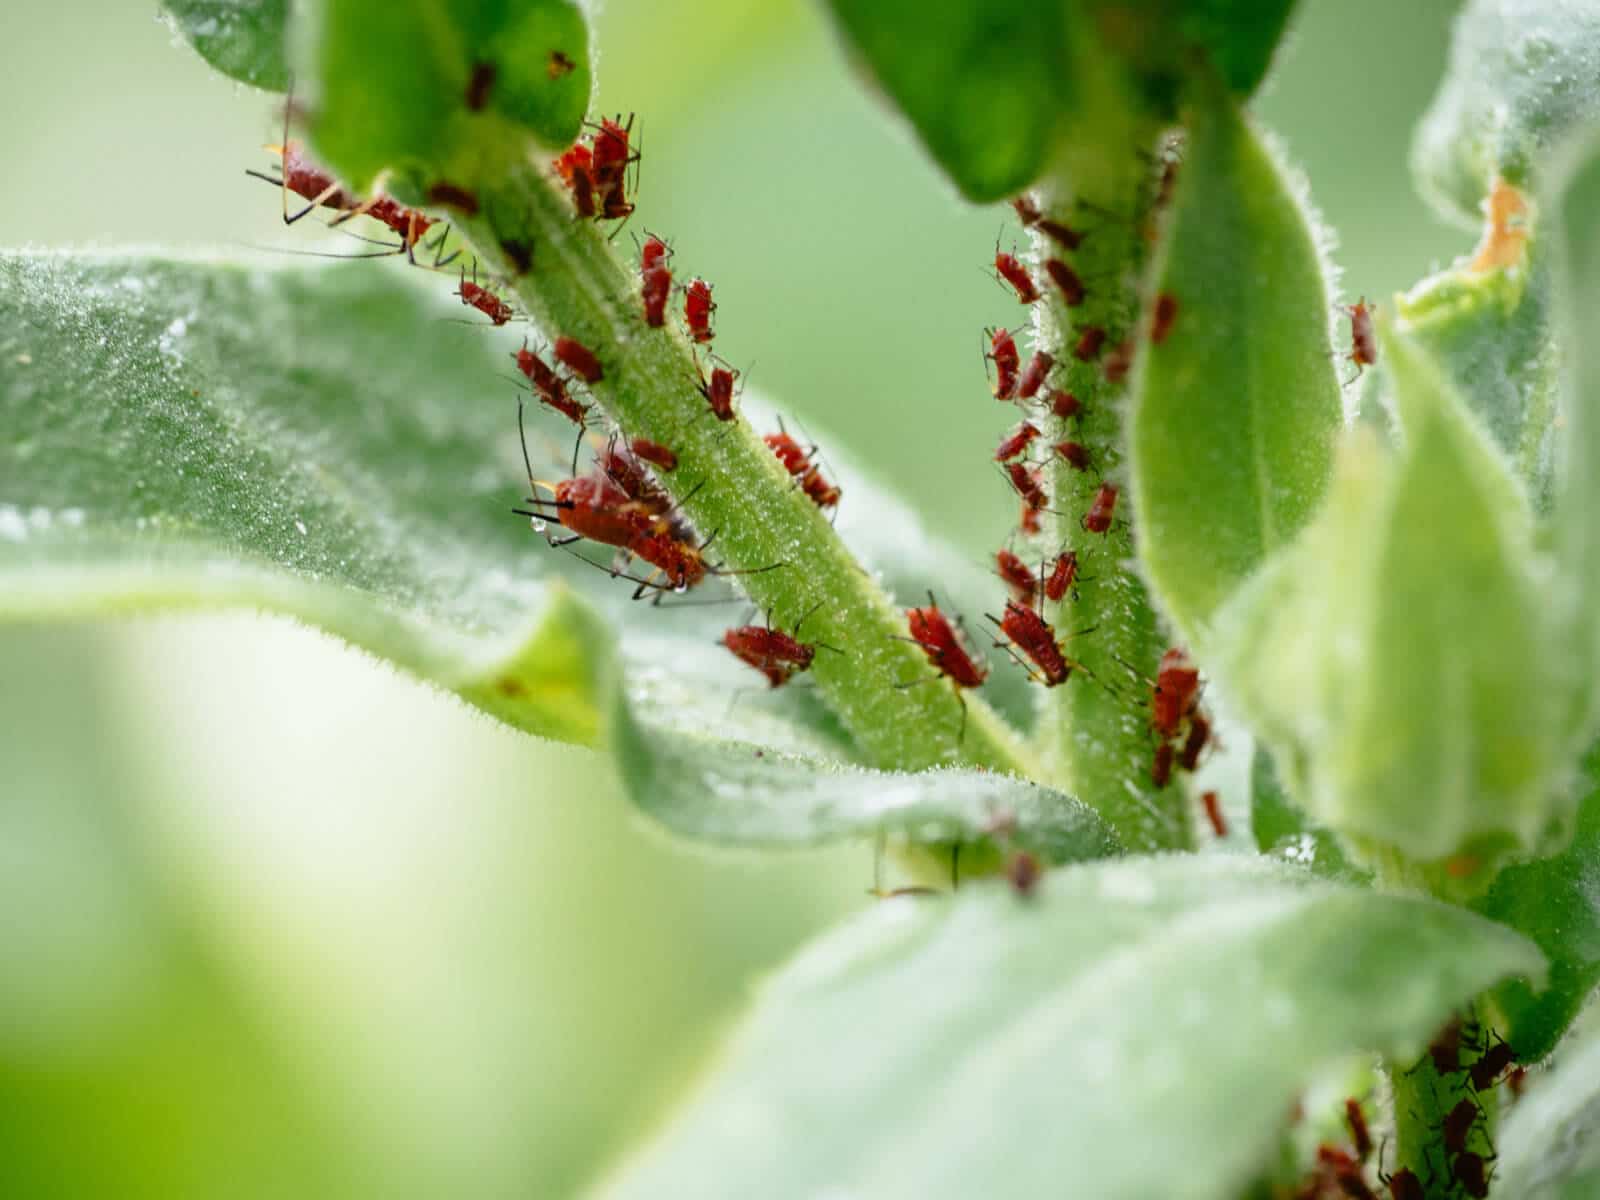 How to get rid of aphids in your garden